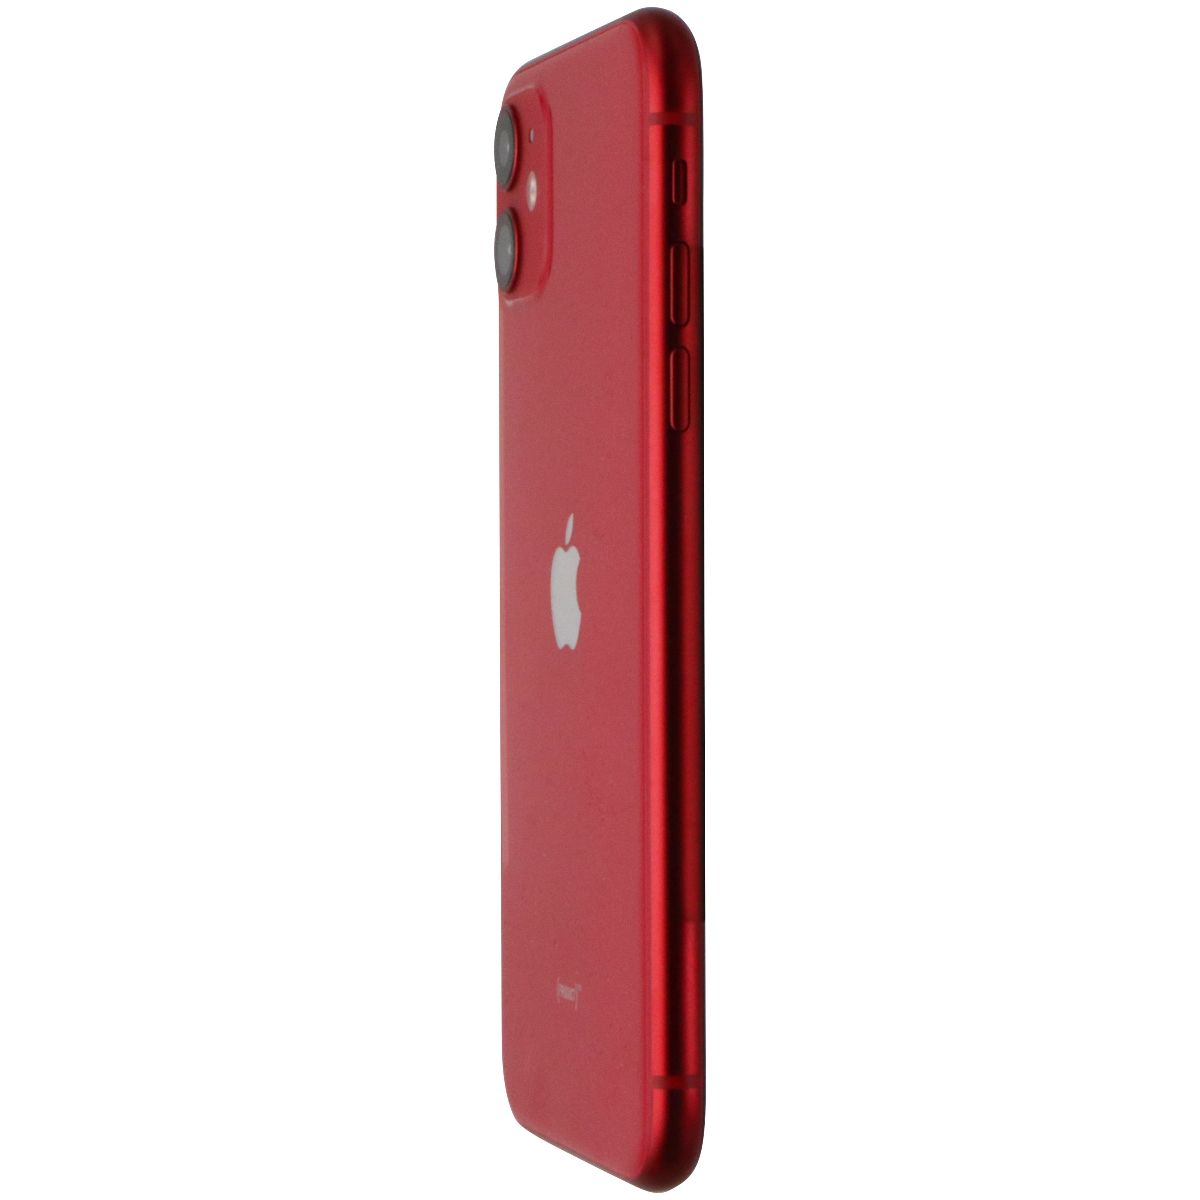 Apple iPhone 11 (6.1-in) (A2111) Unlocked - 64GB / Red - Bad Face ID* Cell Phones & Smartphones Apple    - Simple Cell Bulk Wholesale Pricing - USA Seller